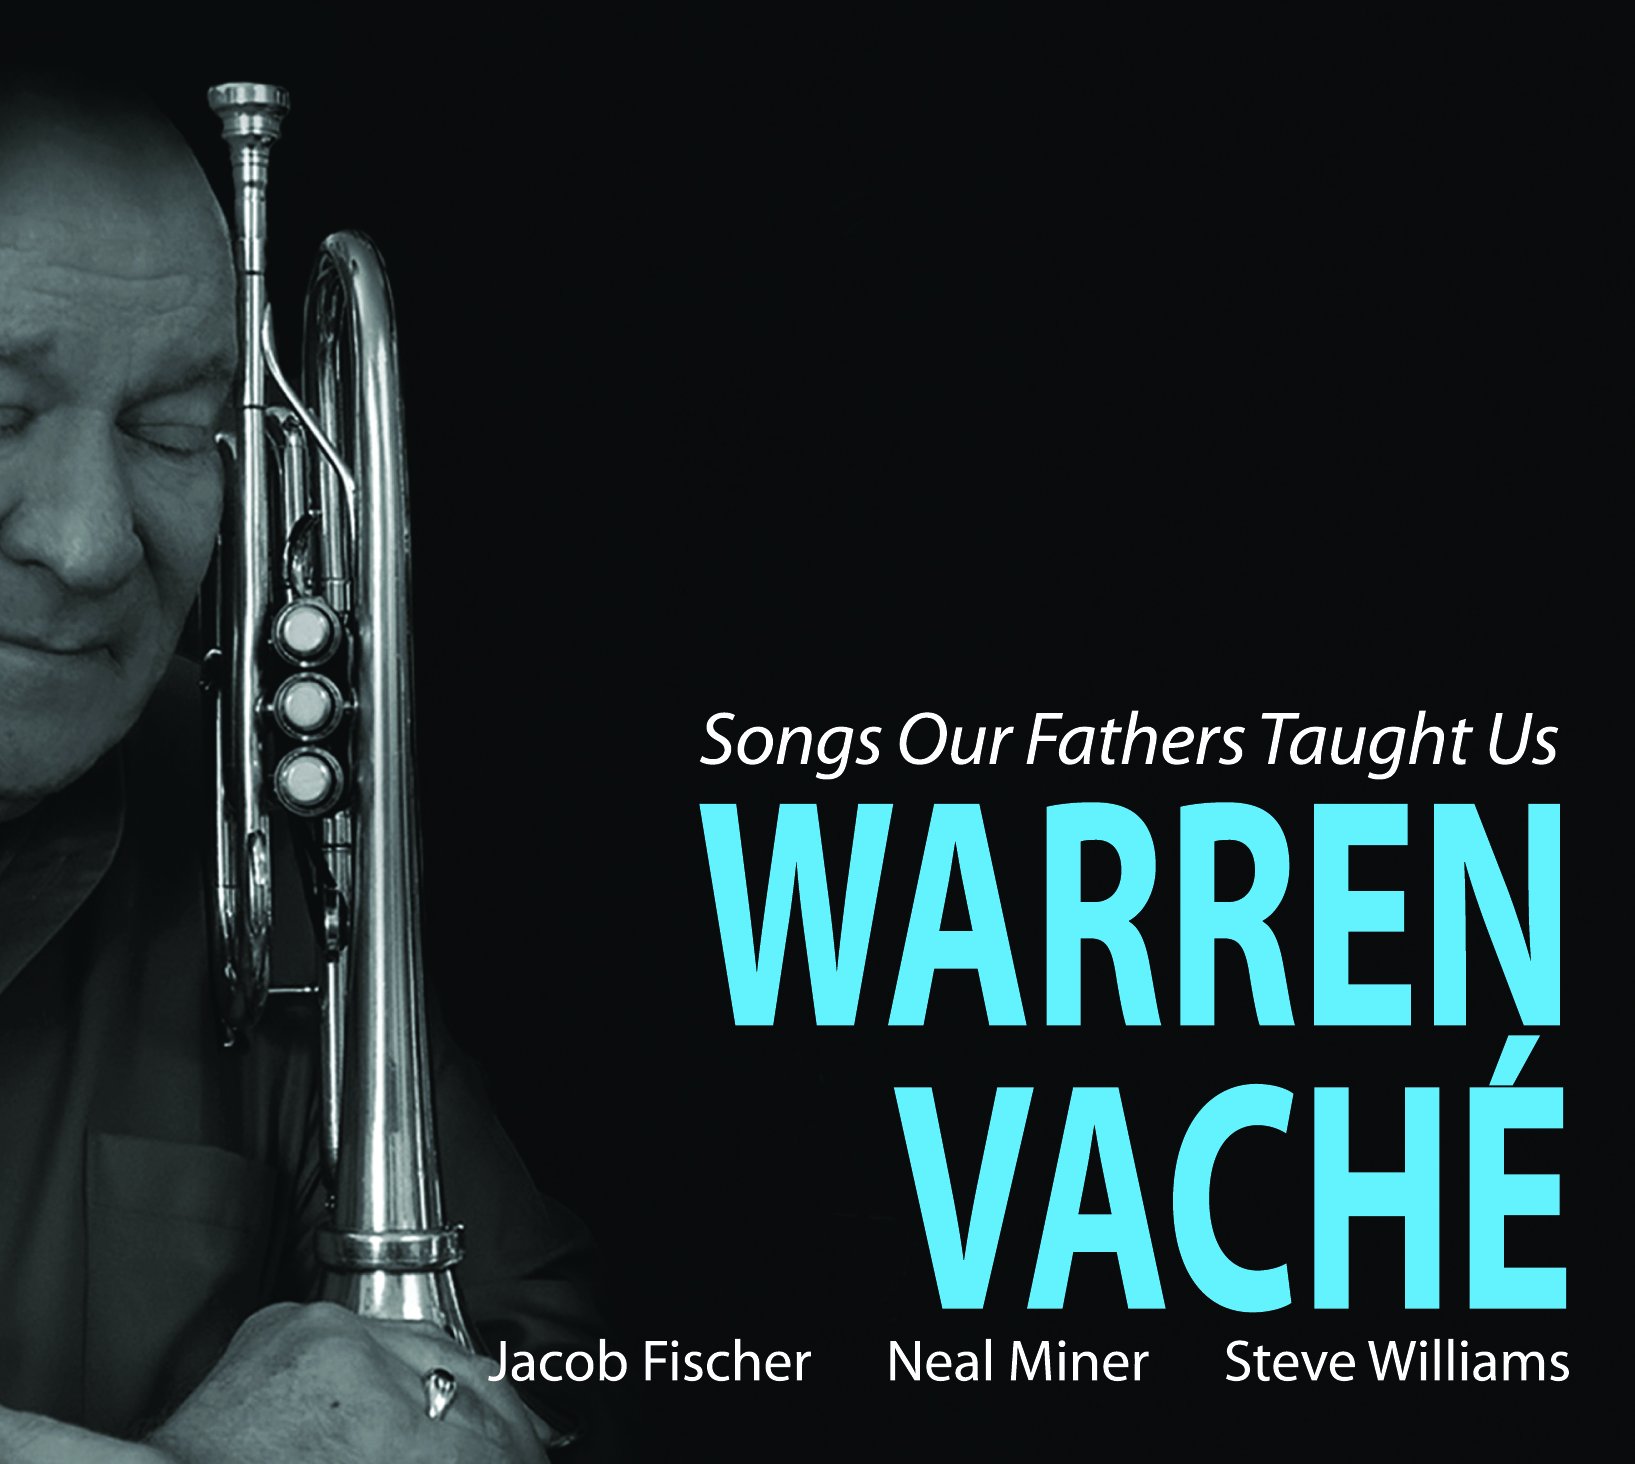 Warren Vache / Songs Our Fathers Taught Us